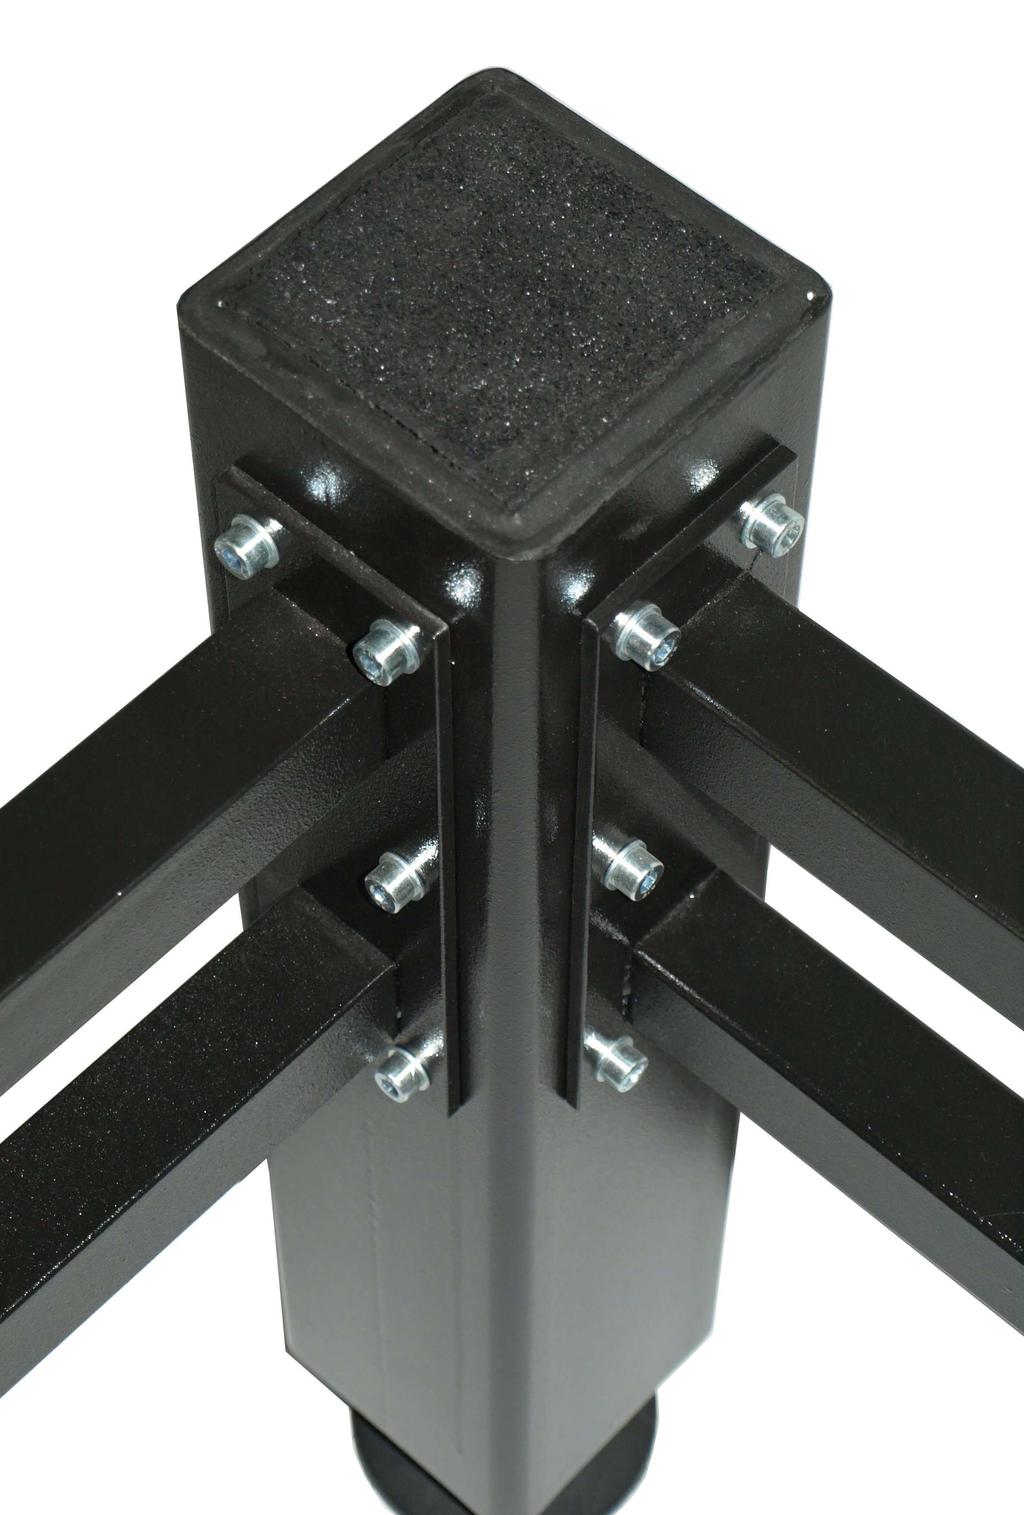 Support System without Vibration Isolation Rigid Table Support Type LMT (Leveling Mount Table) The table top is joint inflexible to the support